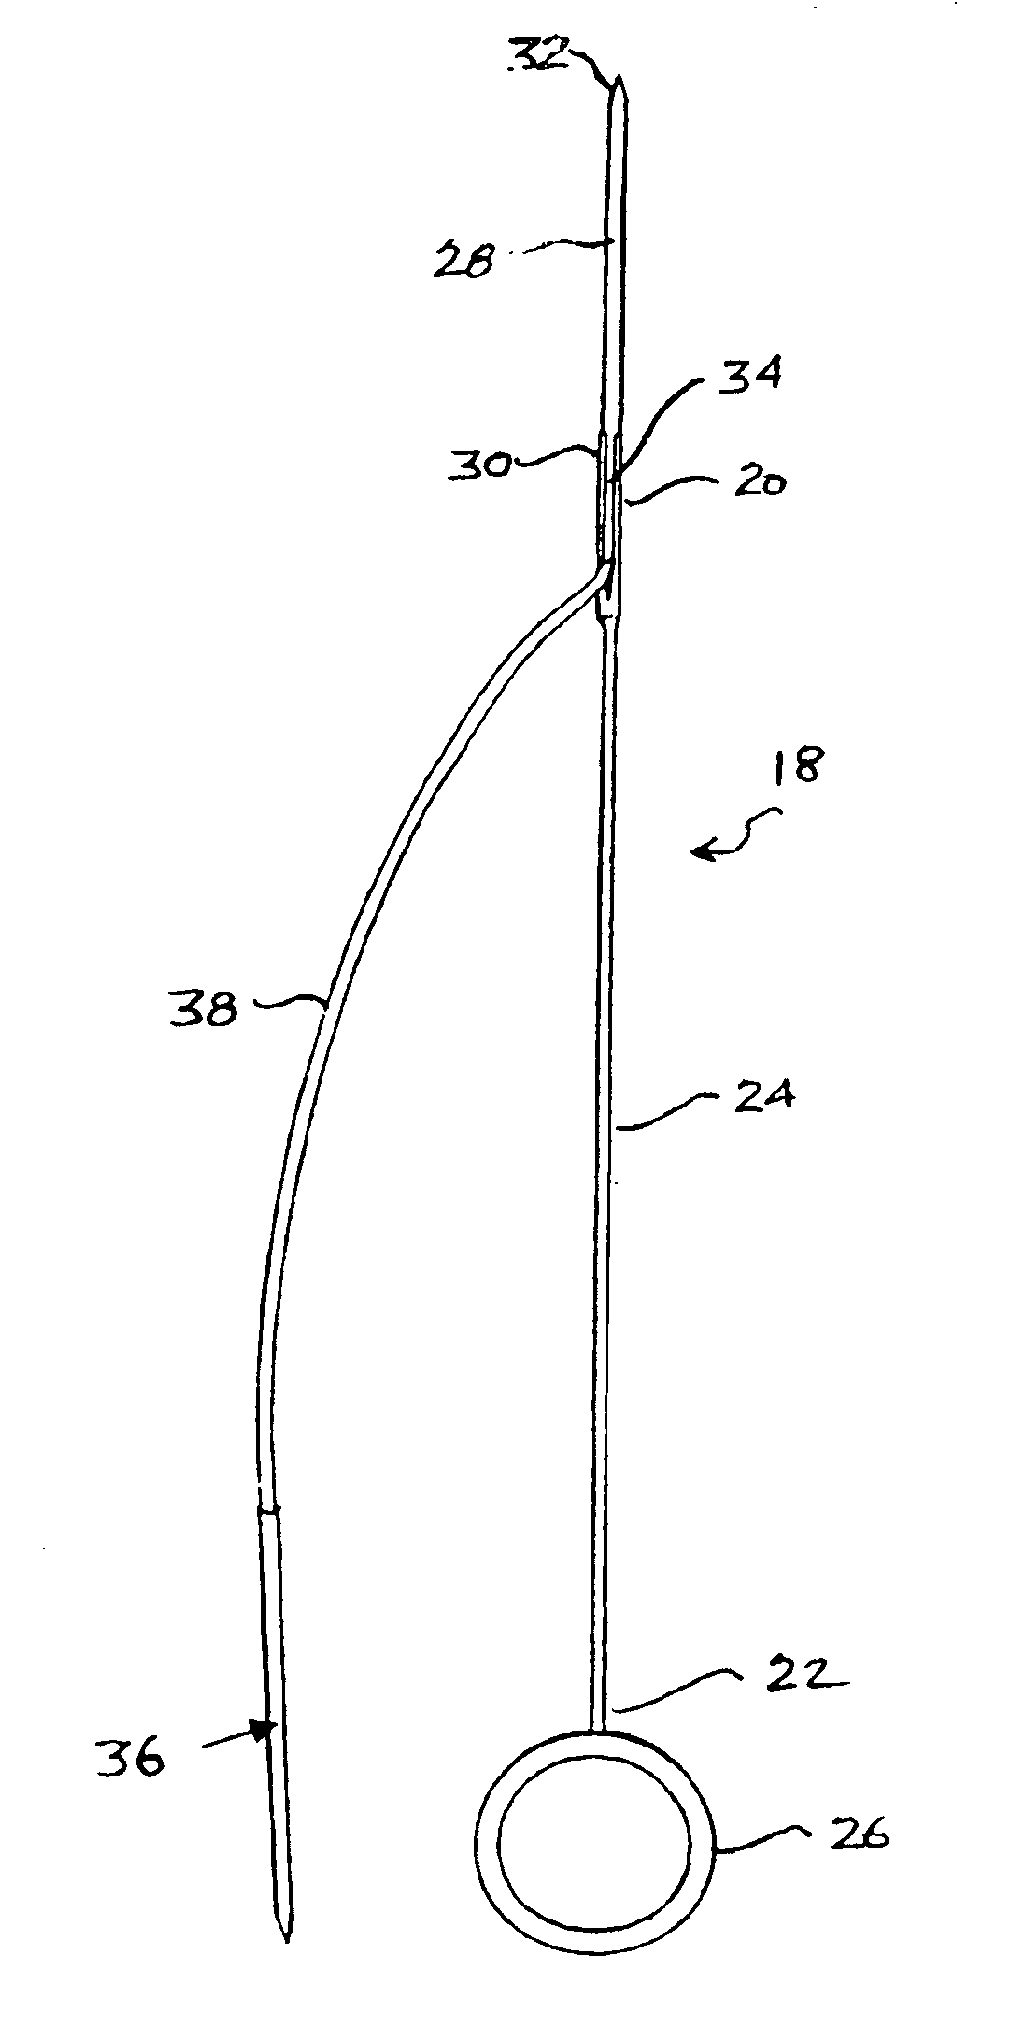 Meniscus and soft tissue repair device and method of use